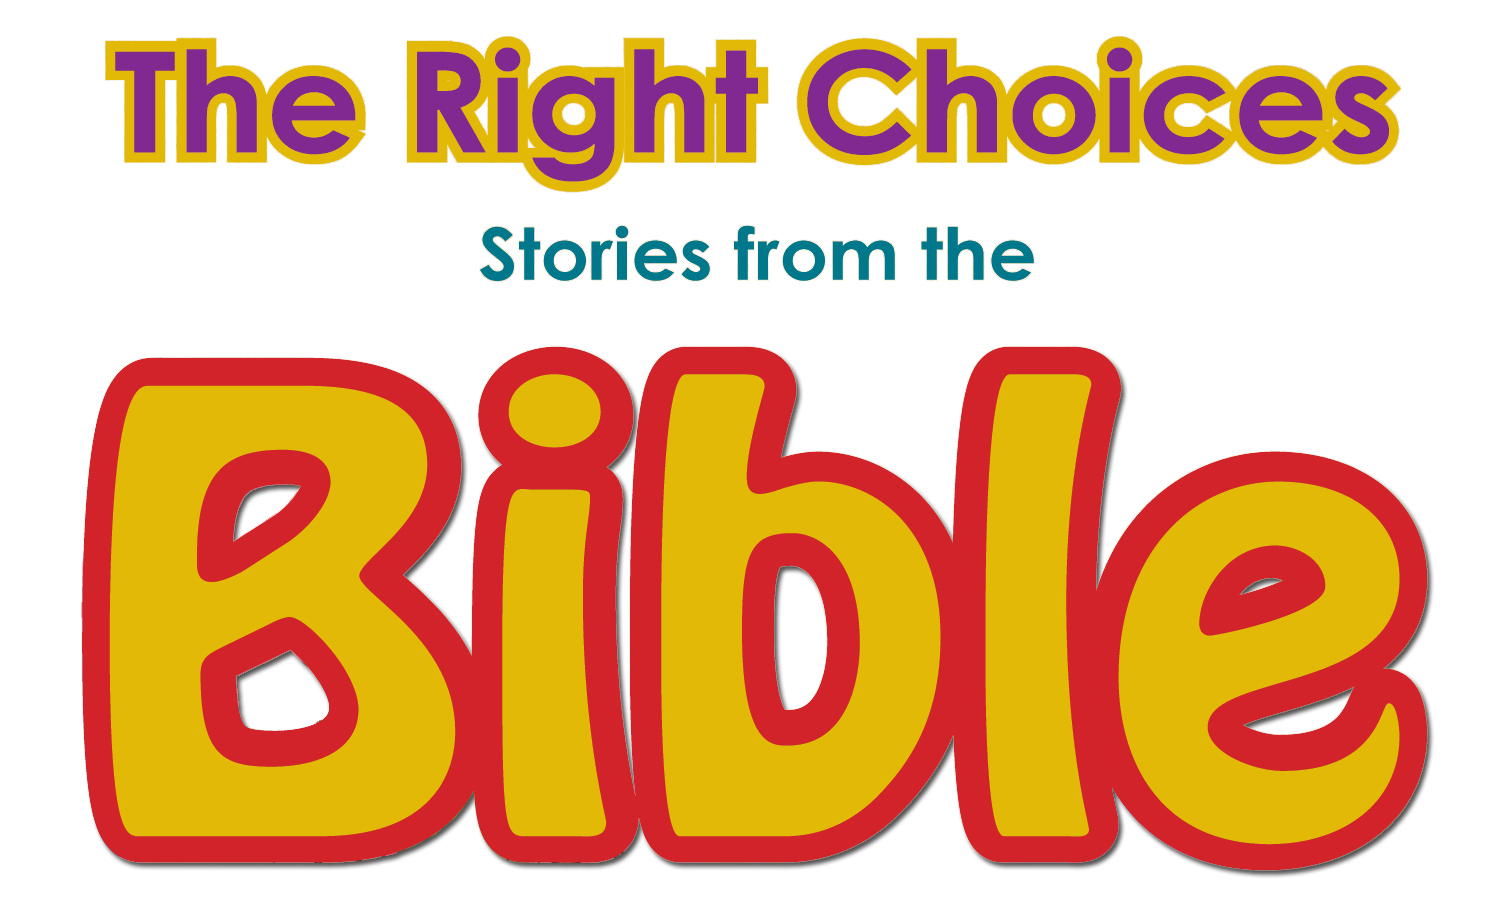 The Right Choices Stories from the Bible title